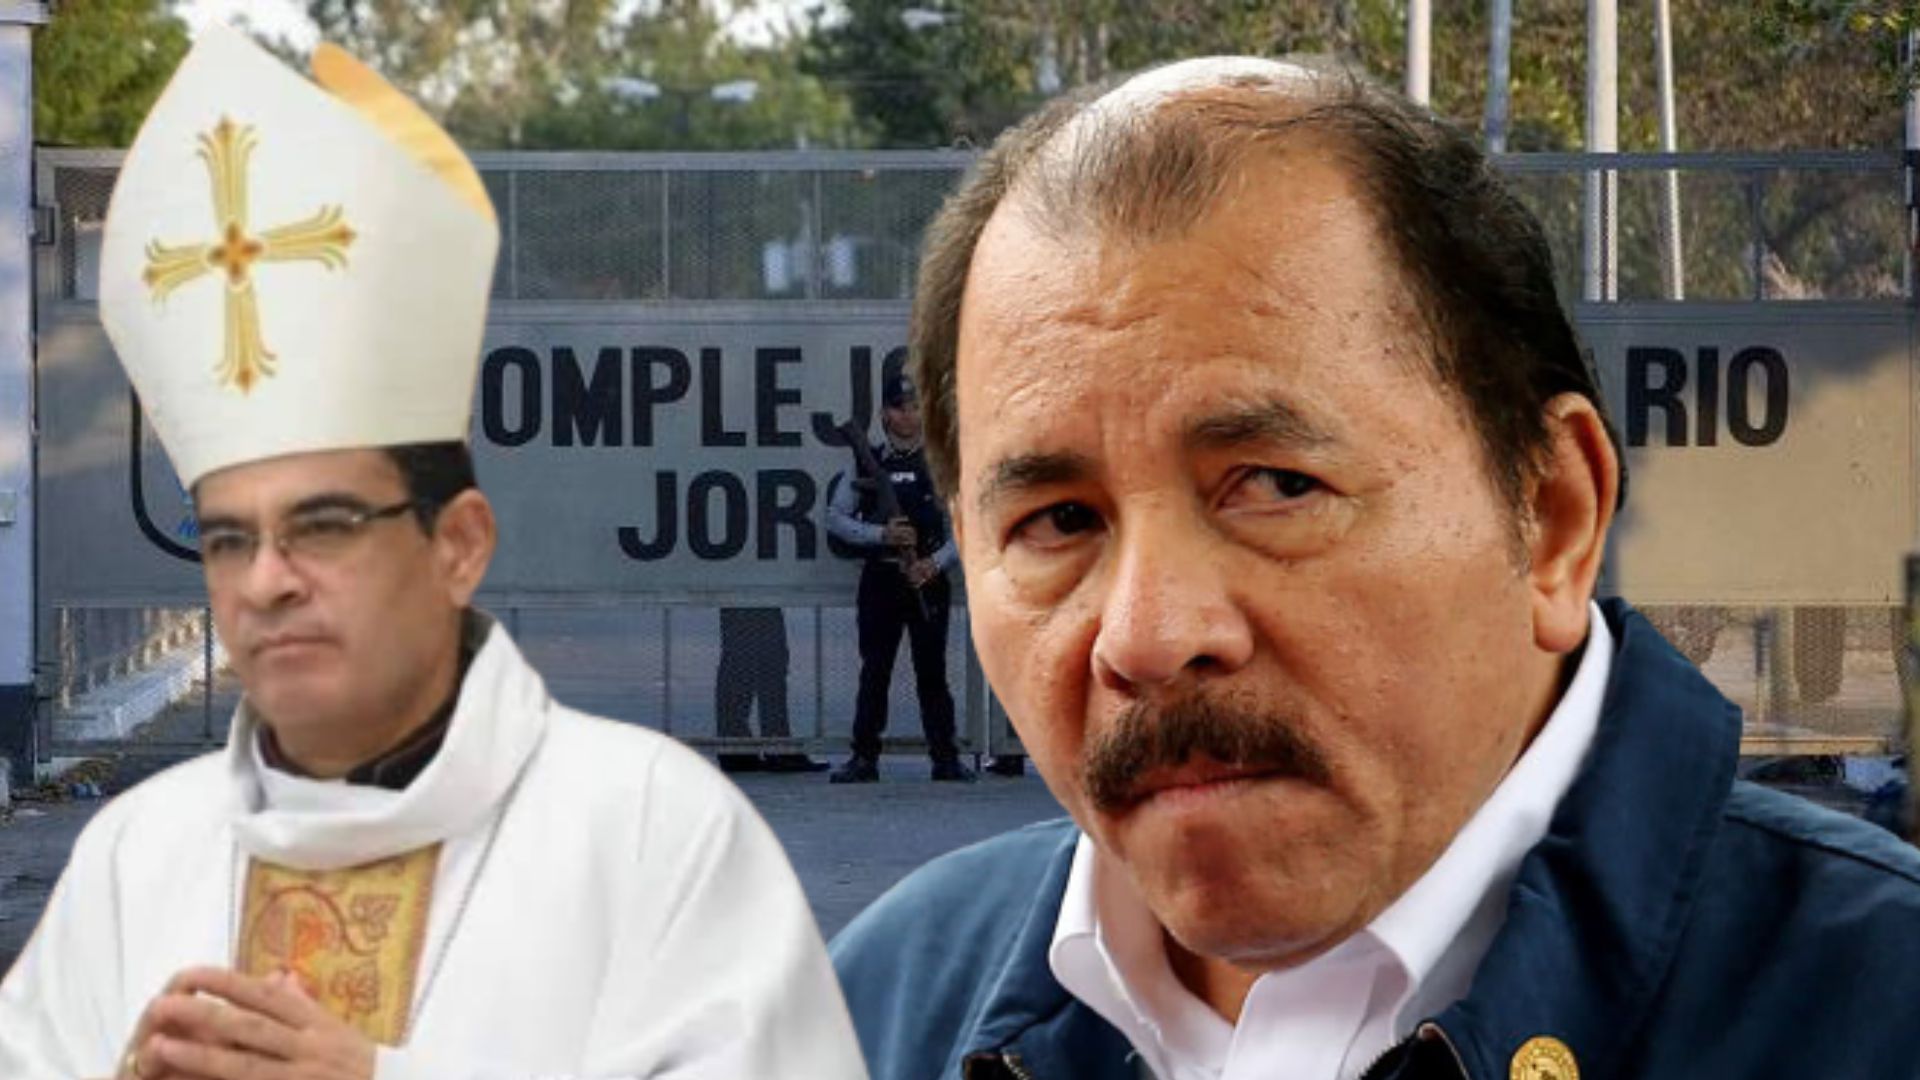 Prison of Monsignor Álvarez and attack on the Church are "crimes against humanity", say opponents